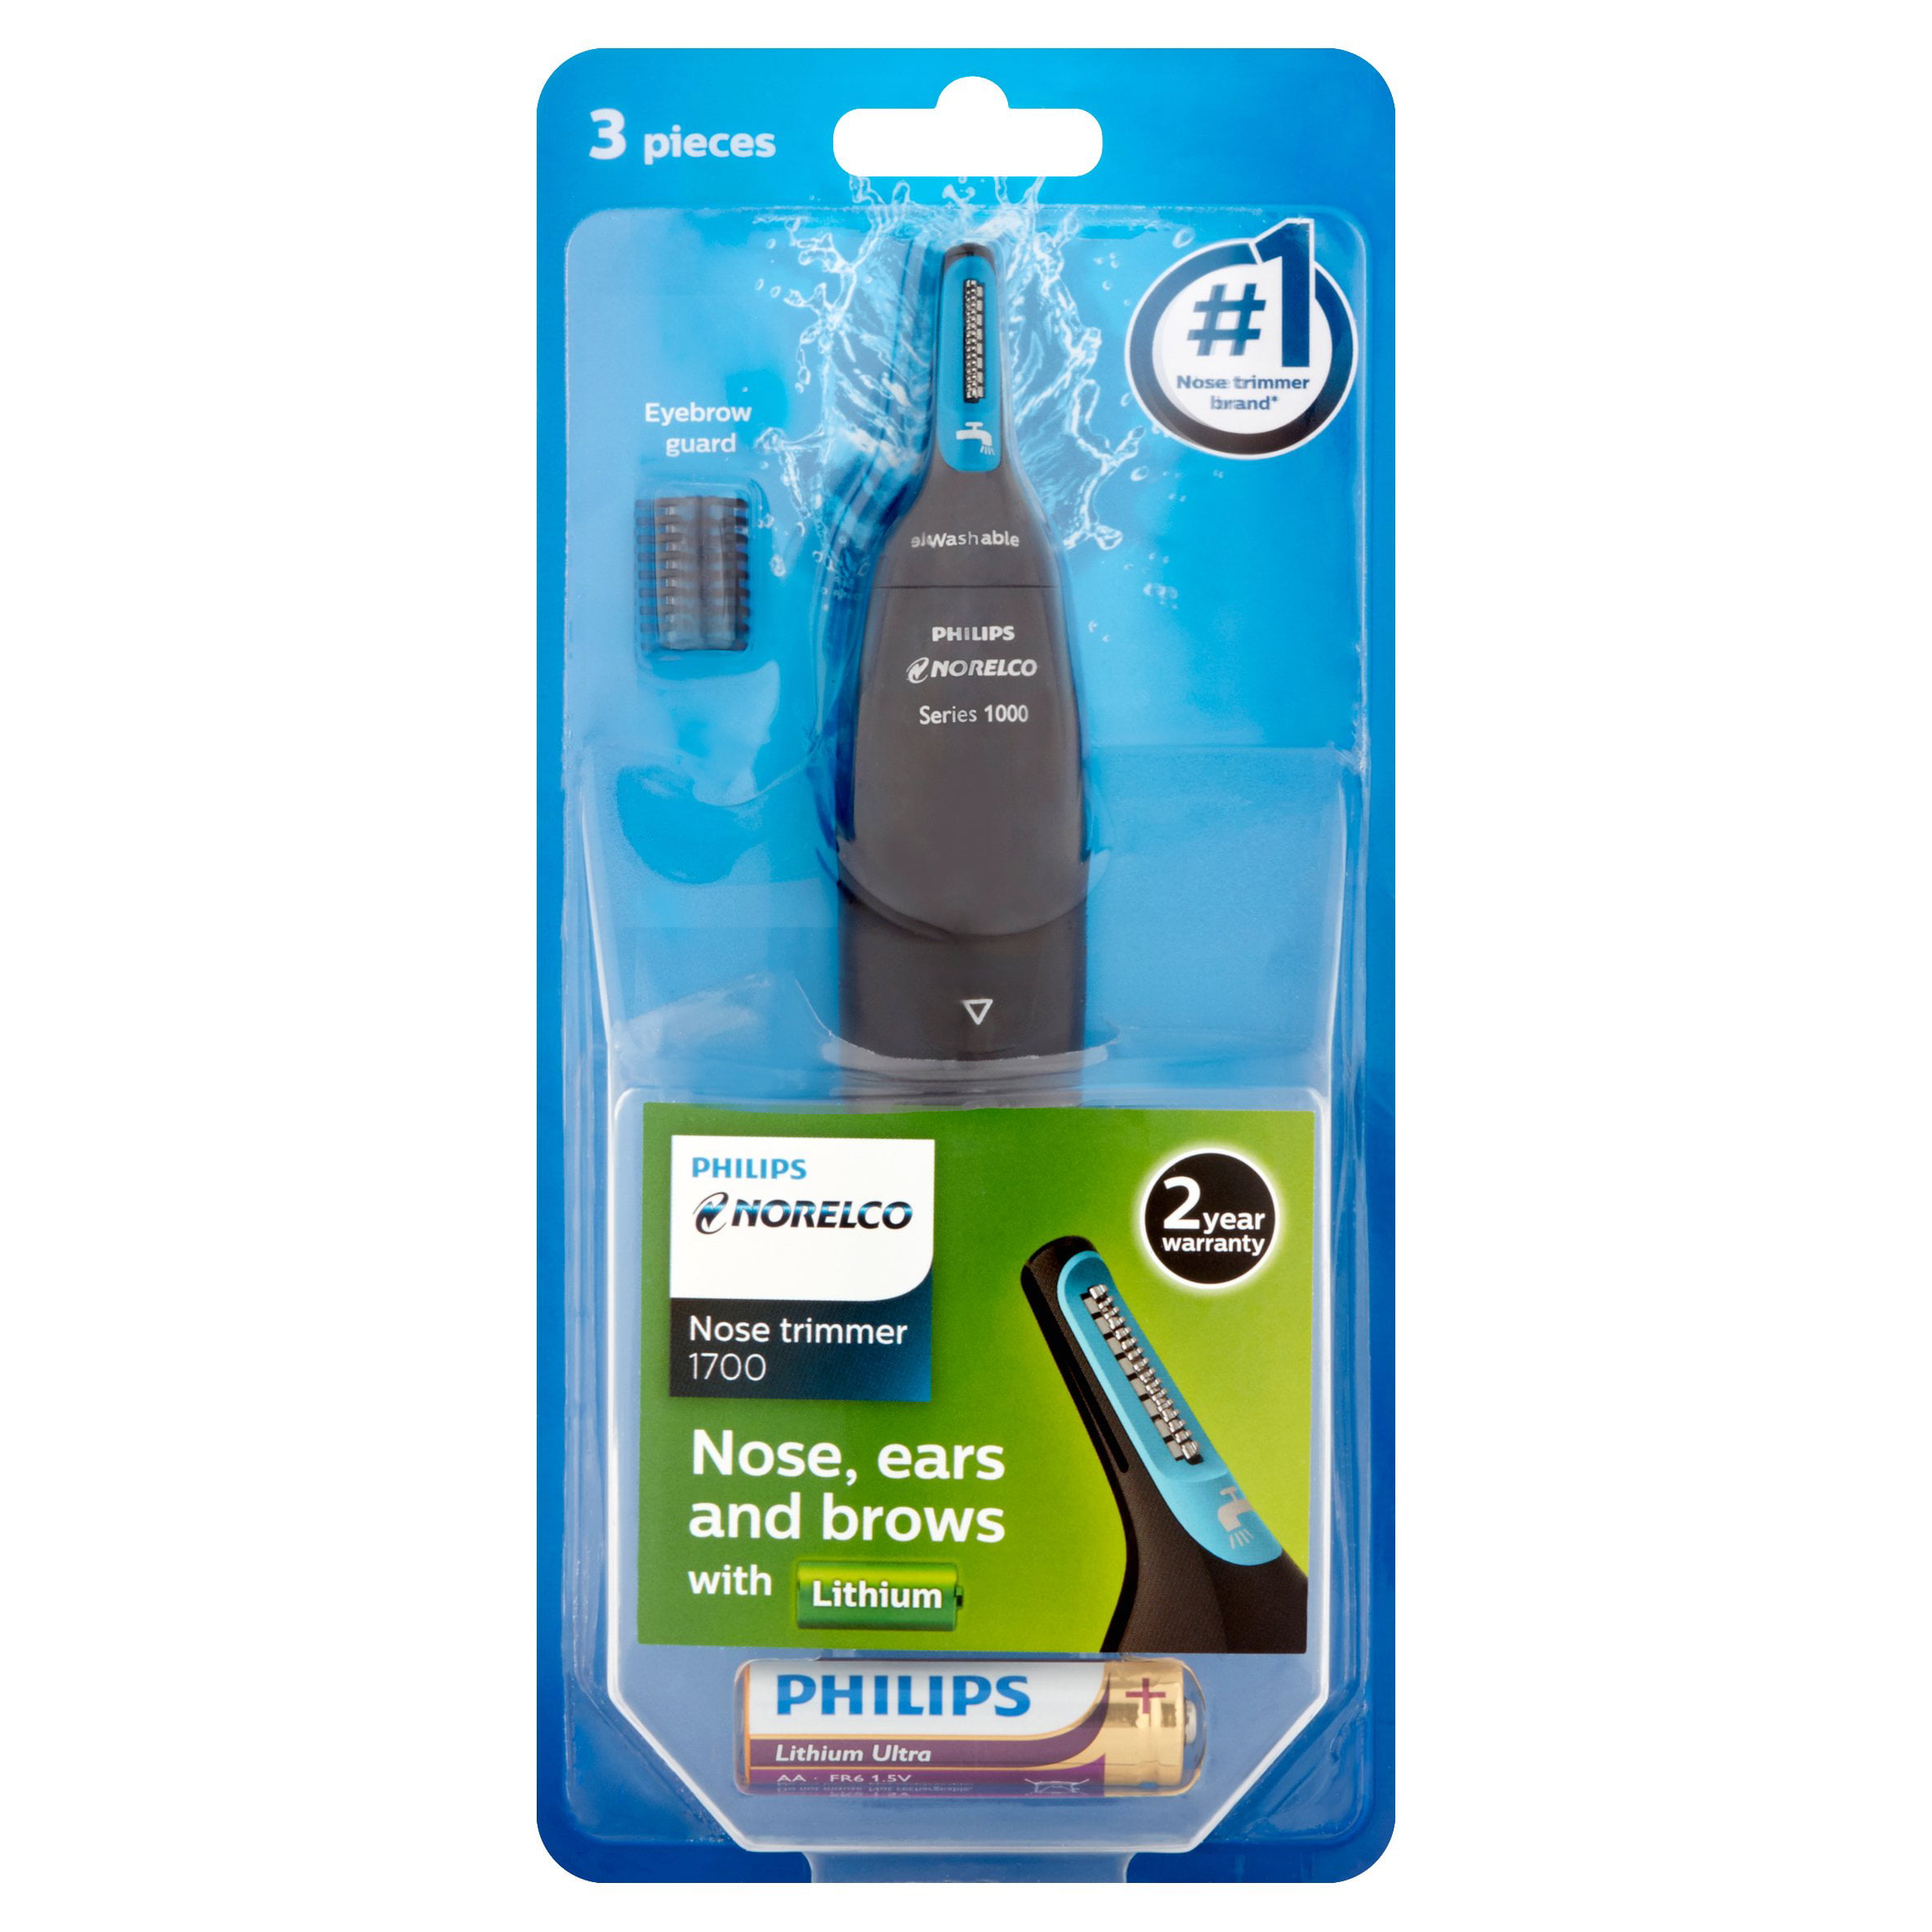 philips norelco series 1000 nose ear & eyebrow trimmer